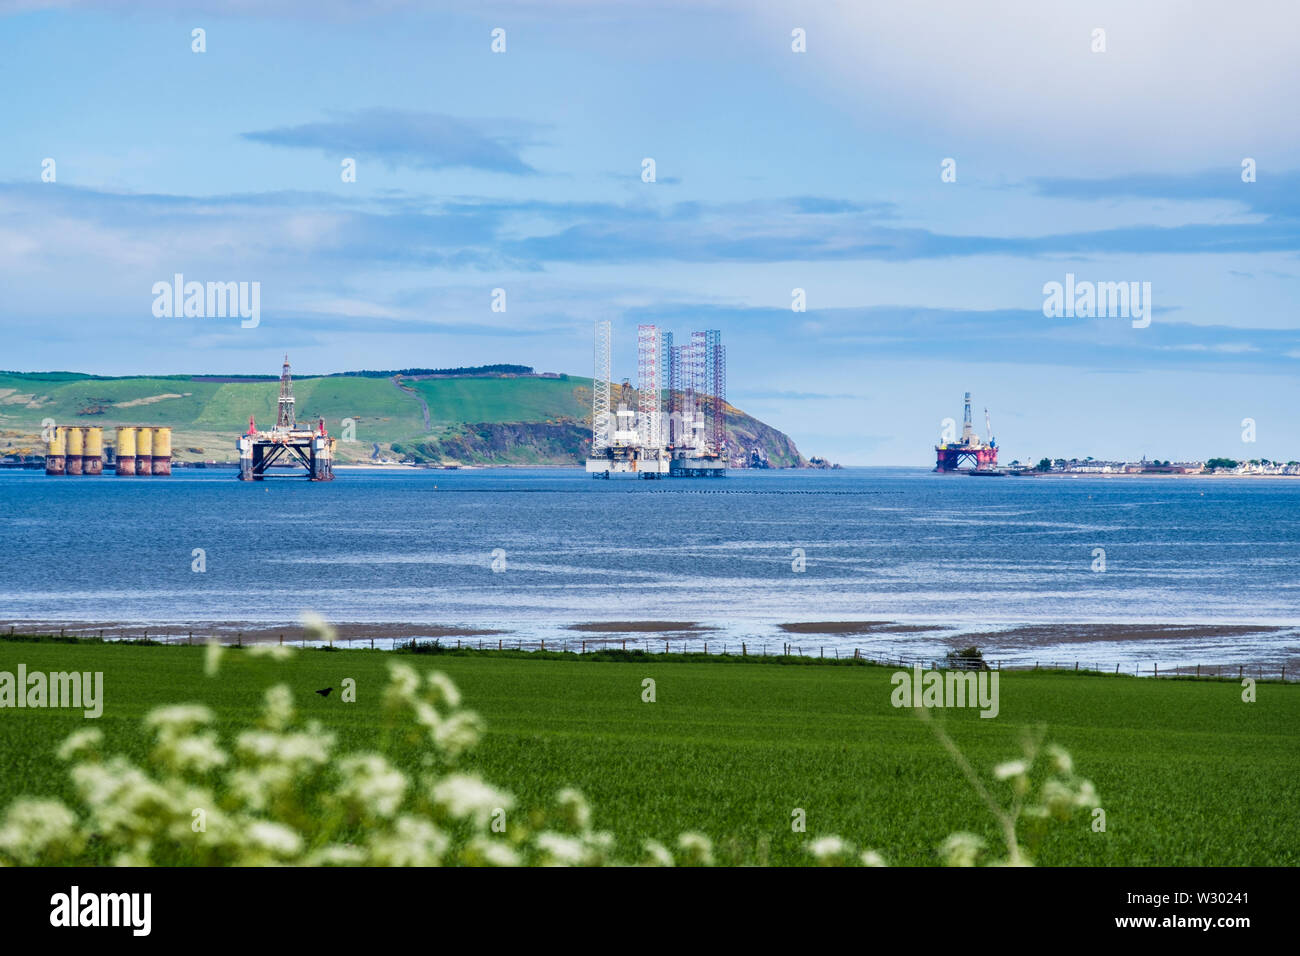 Disused and redundant North Sea oil riggs / drilling platforms stored offshore in Cromarty Firth. Cromarty Black Isle Highland Scotland UK Britain Stock Photo